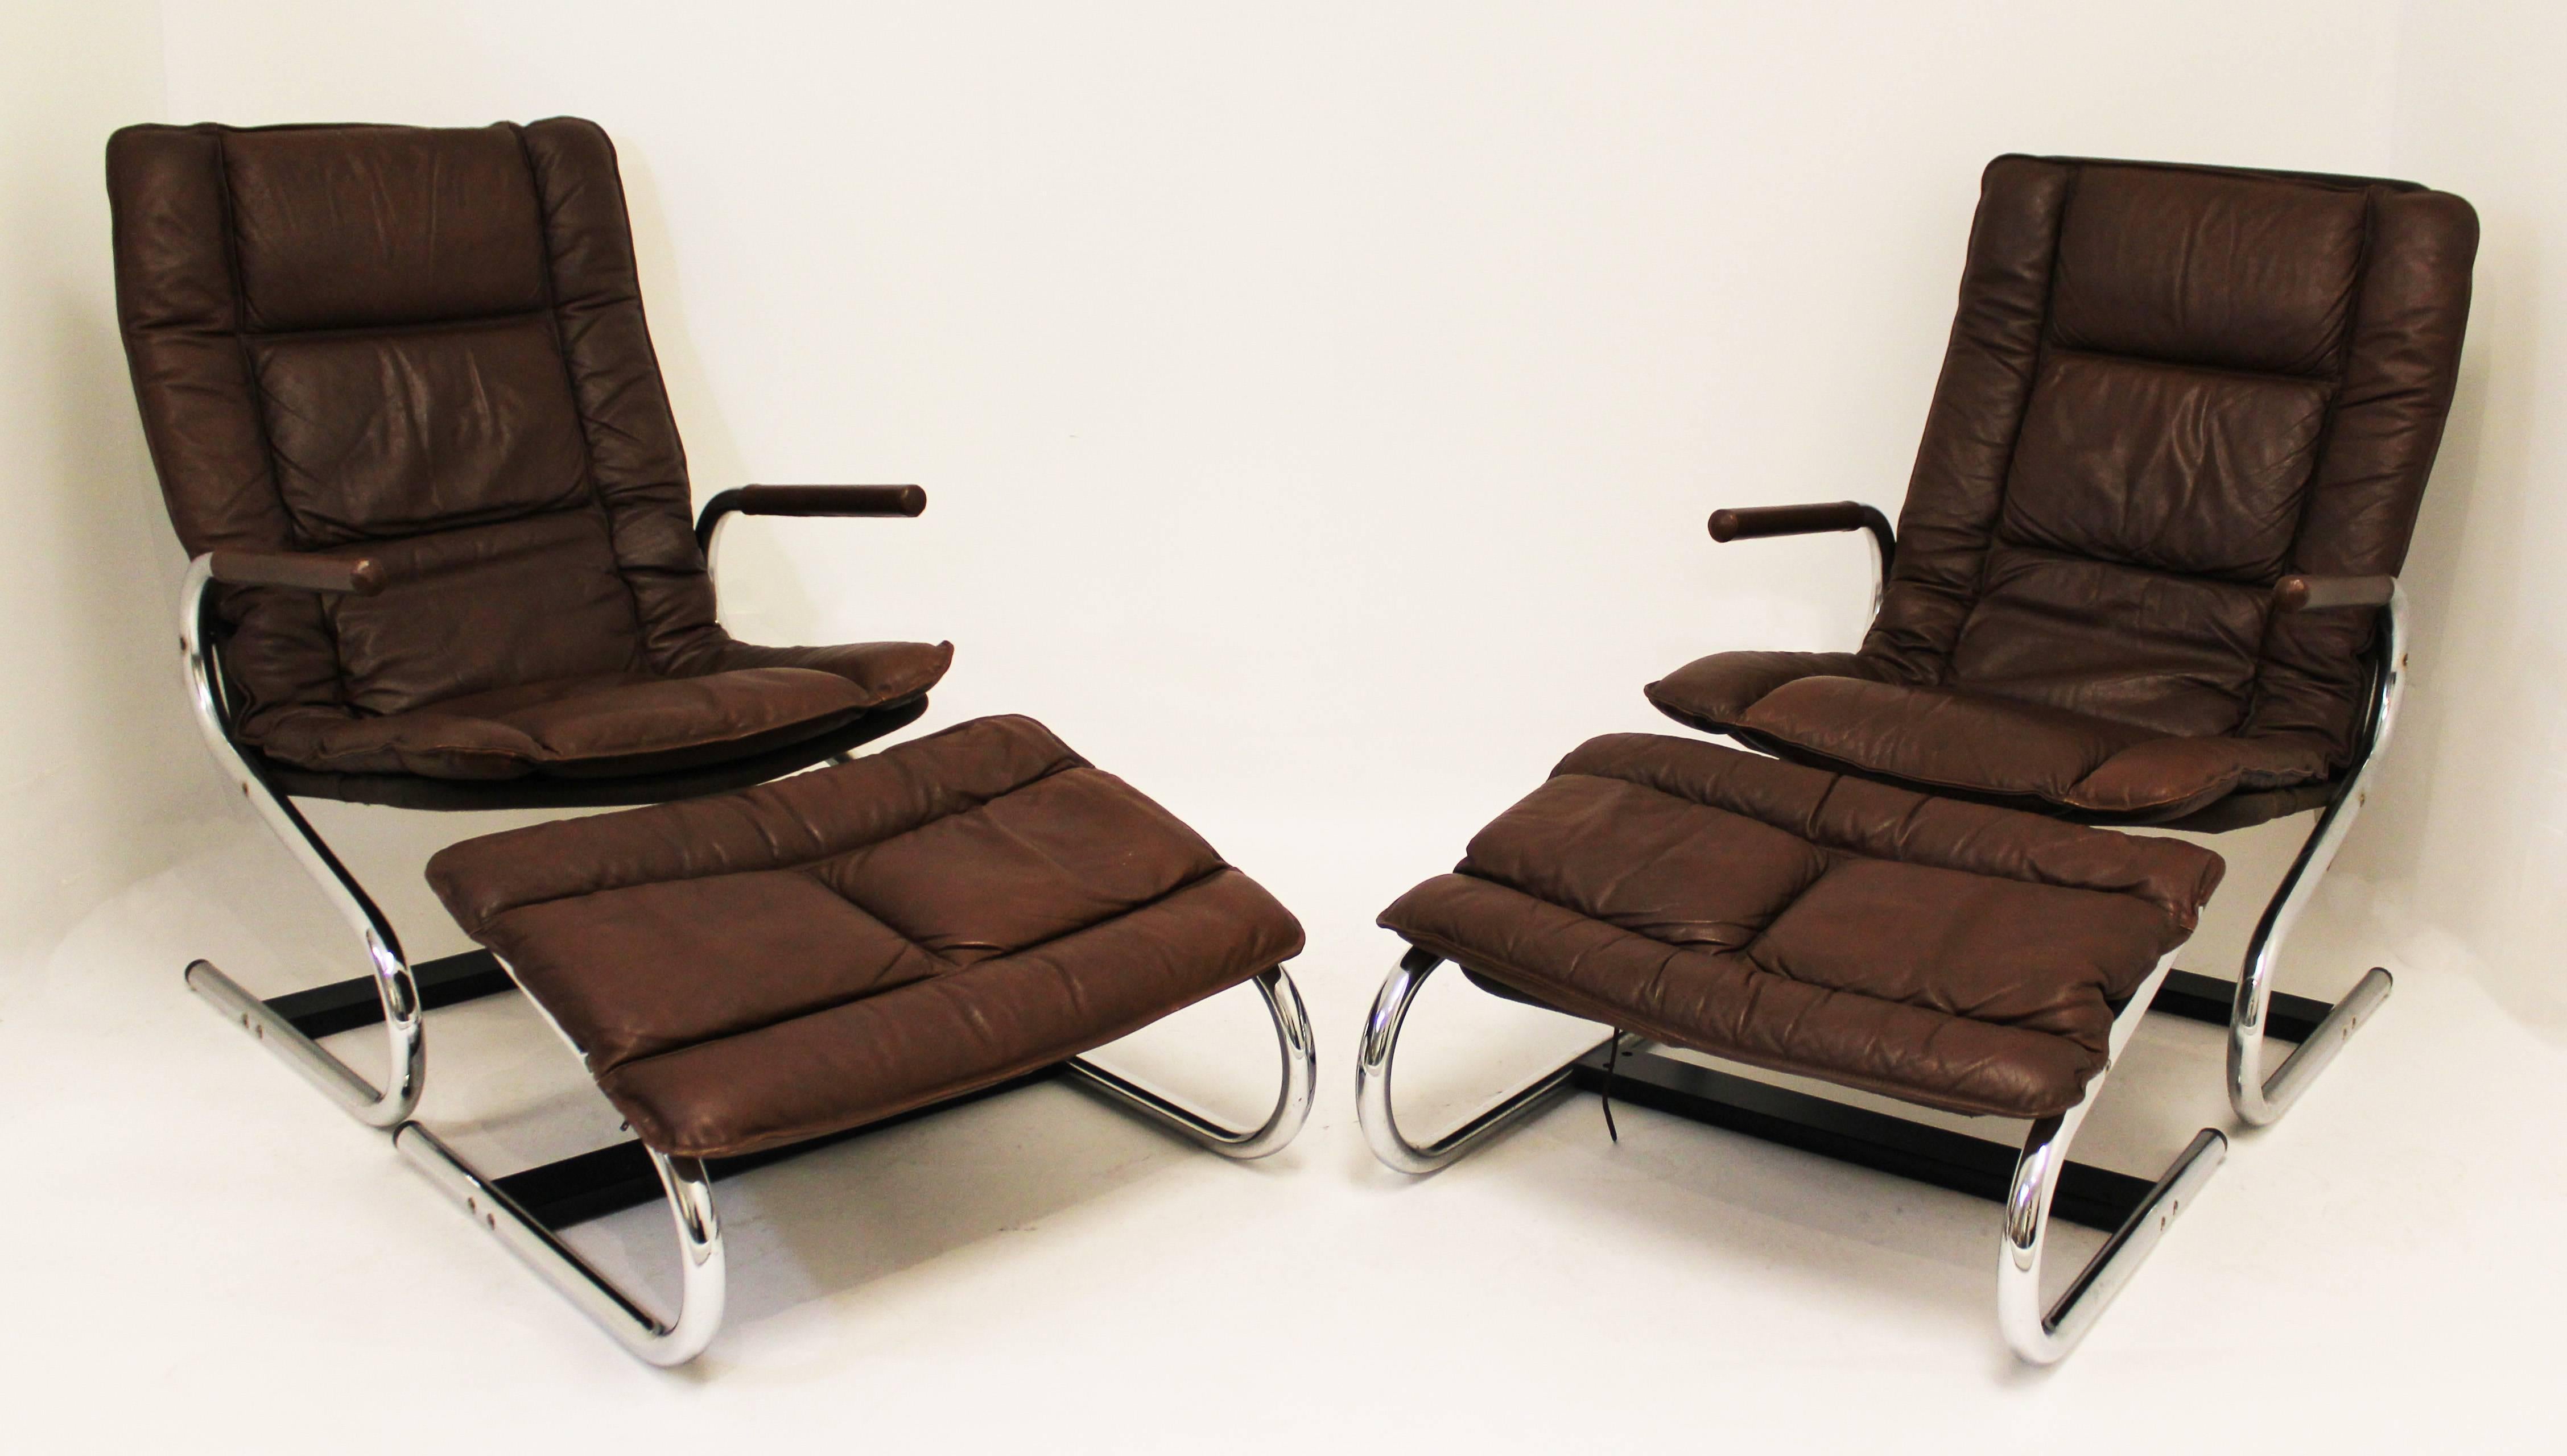 Chrome Mid-Century Modern Ingmar Relling Pair of Lounge Chairs and Ottomans, Danish